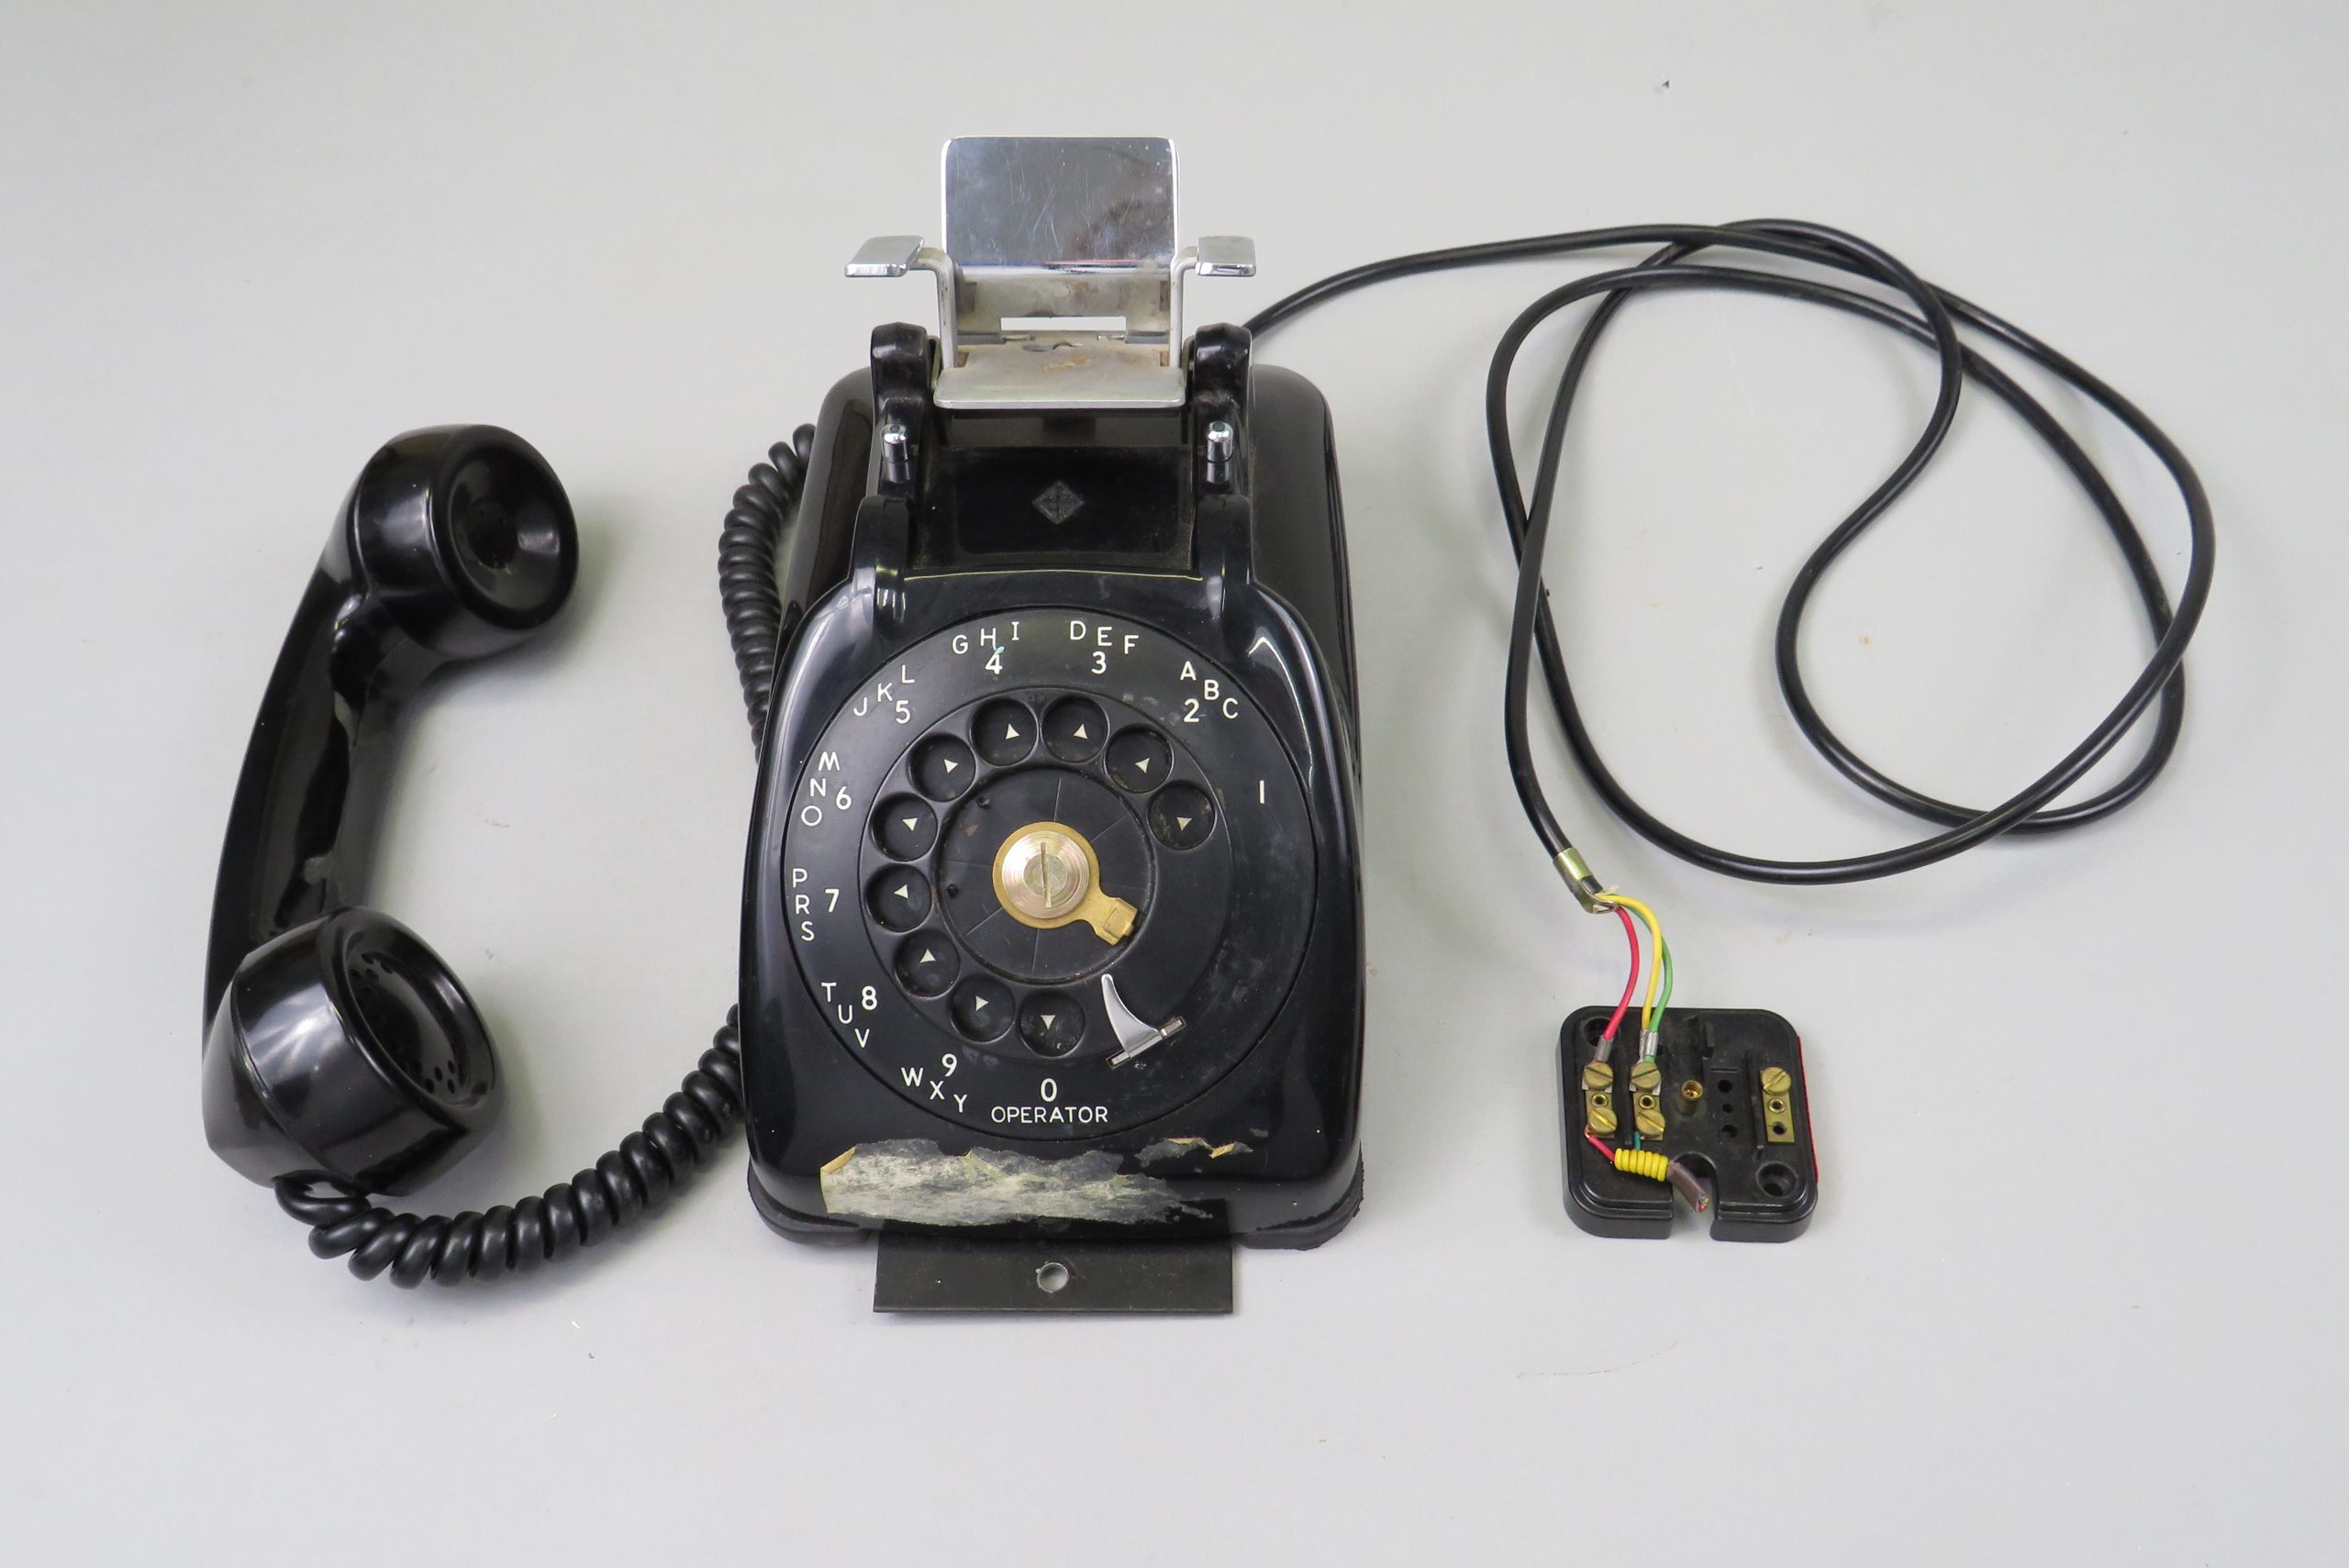 https://diefenbunker.ca/wp-content/uploads/2023/09/Rotary-Phone-Featured-Image-scaled.jpg